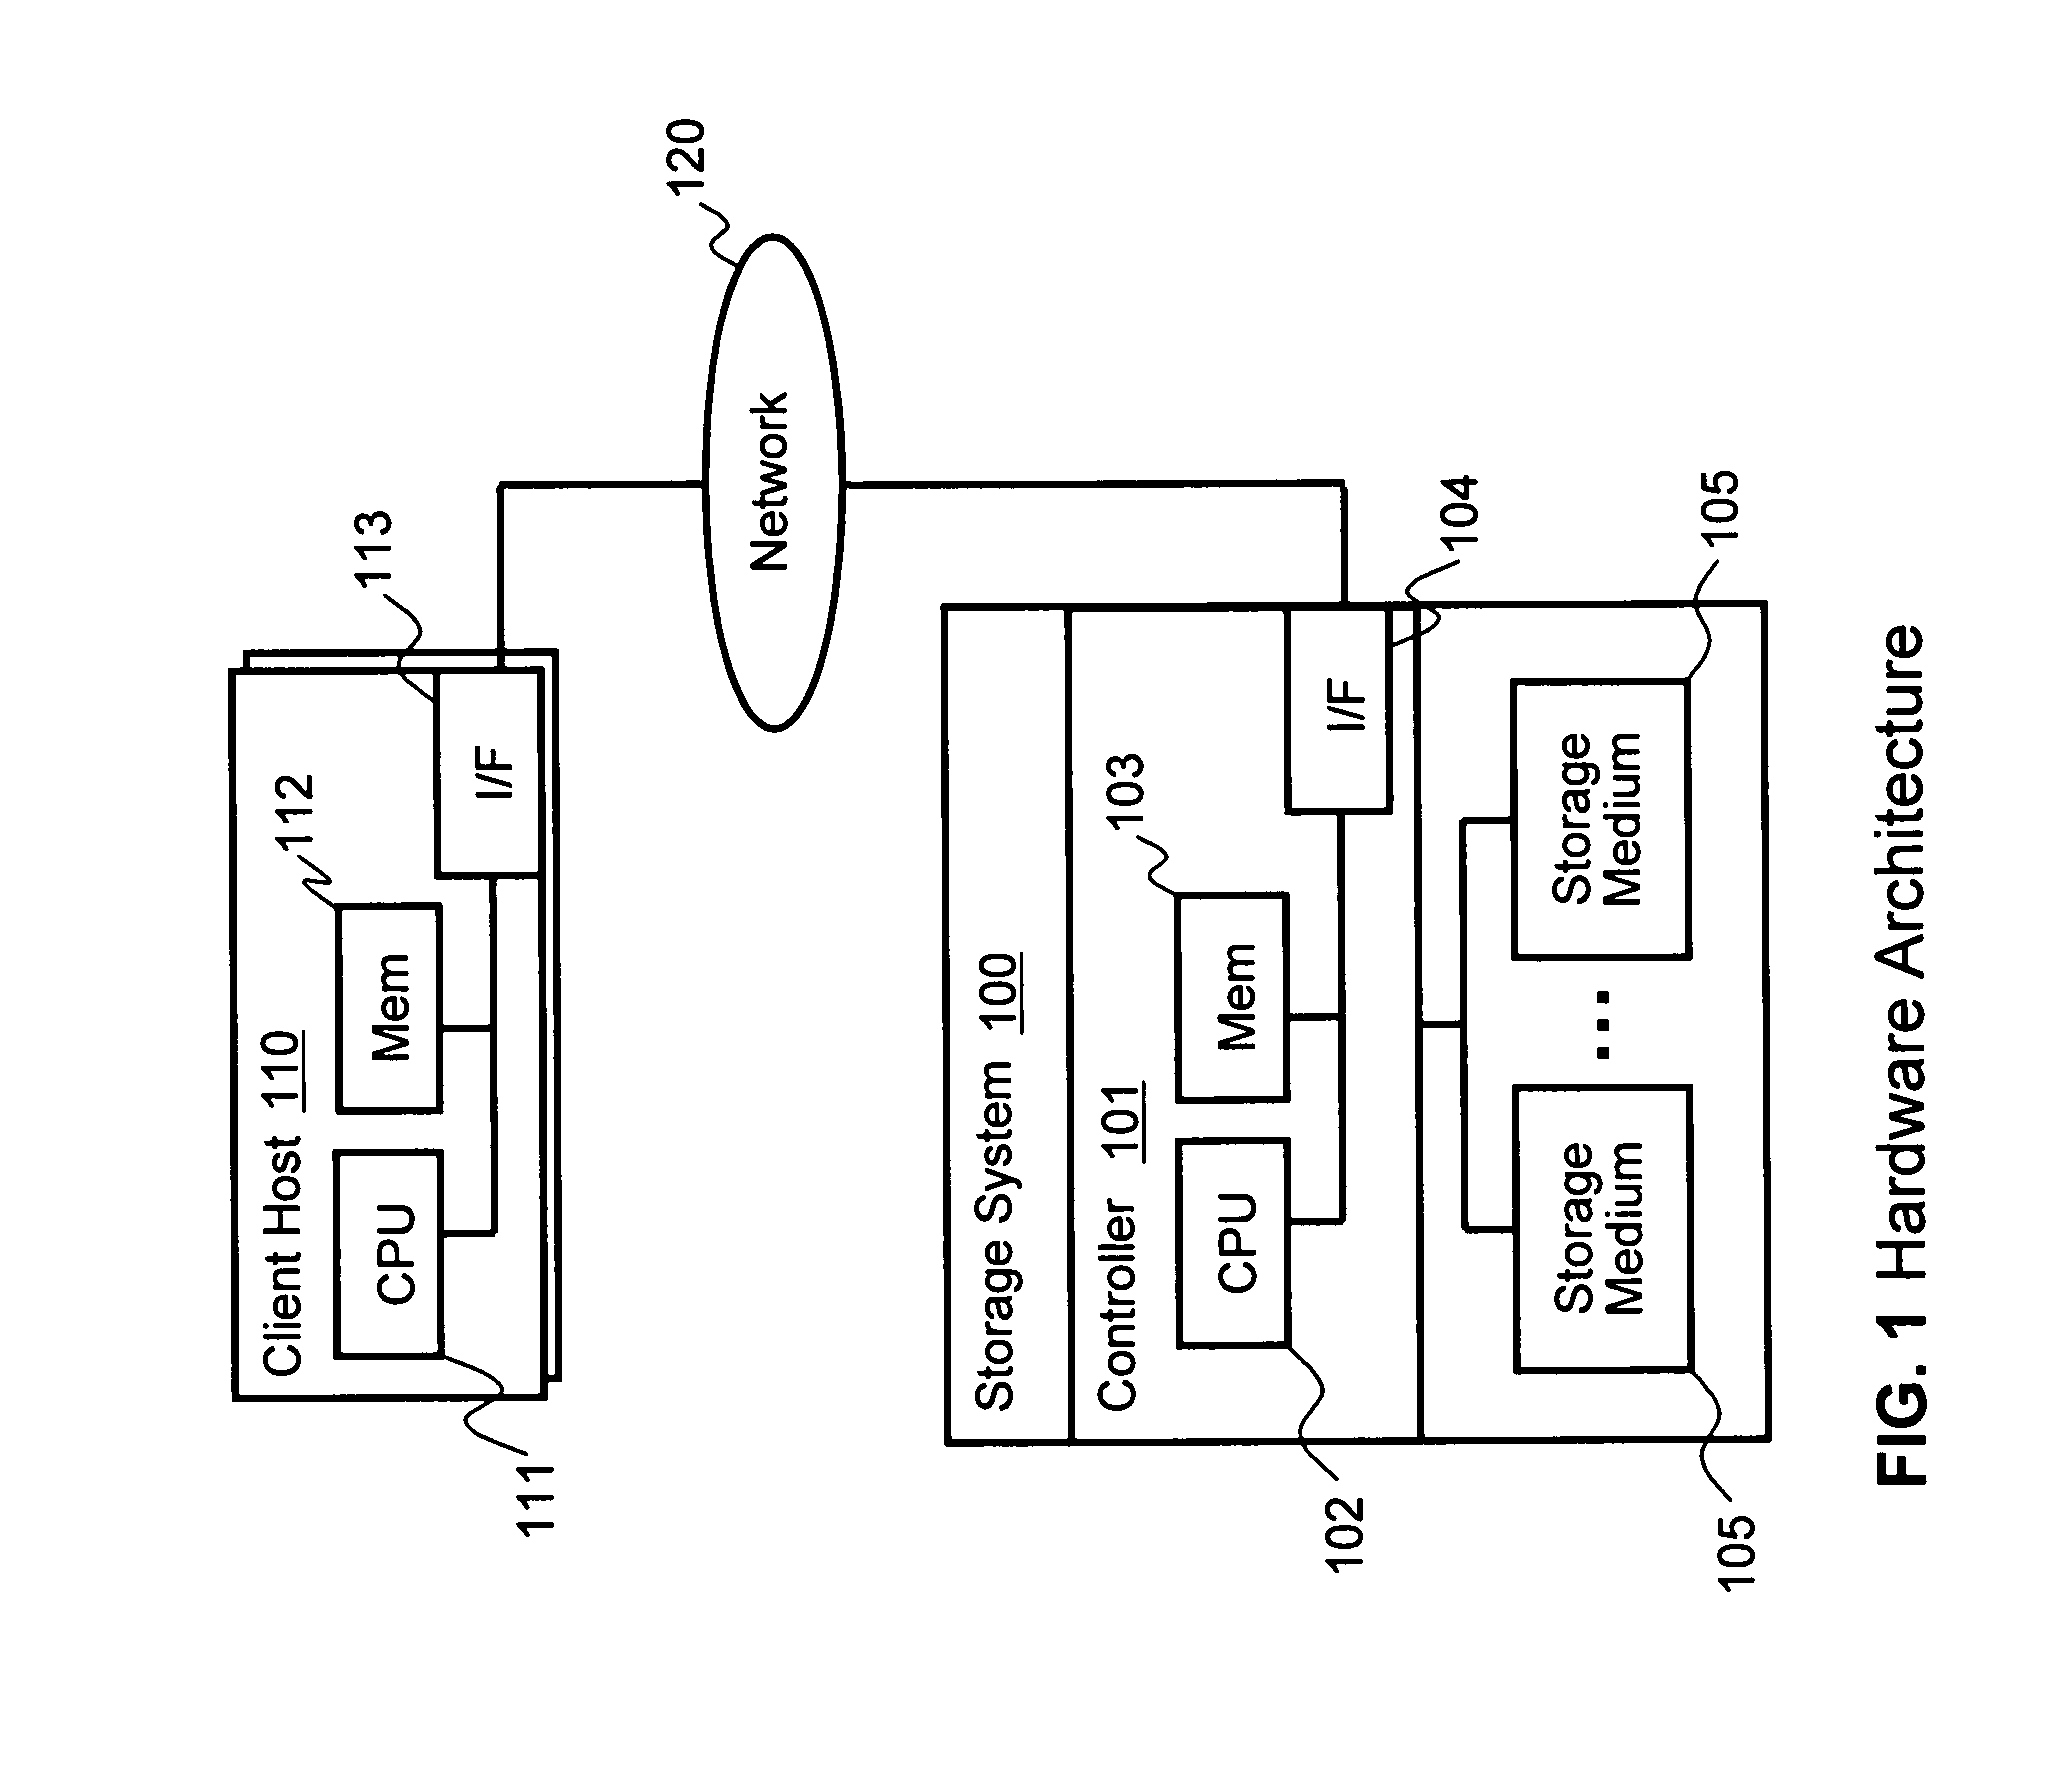 Storage extent allocation method for thin provisioning storage